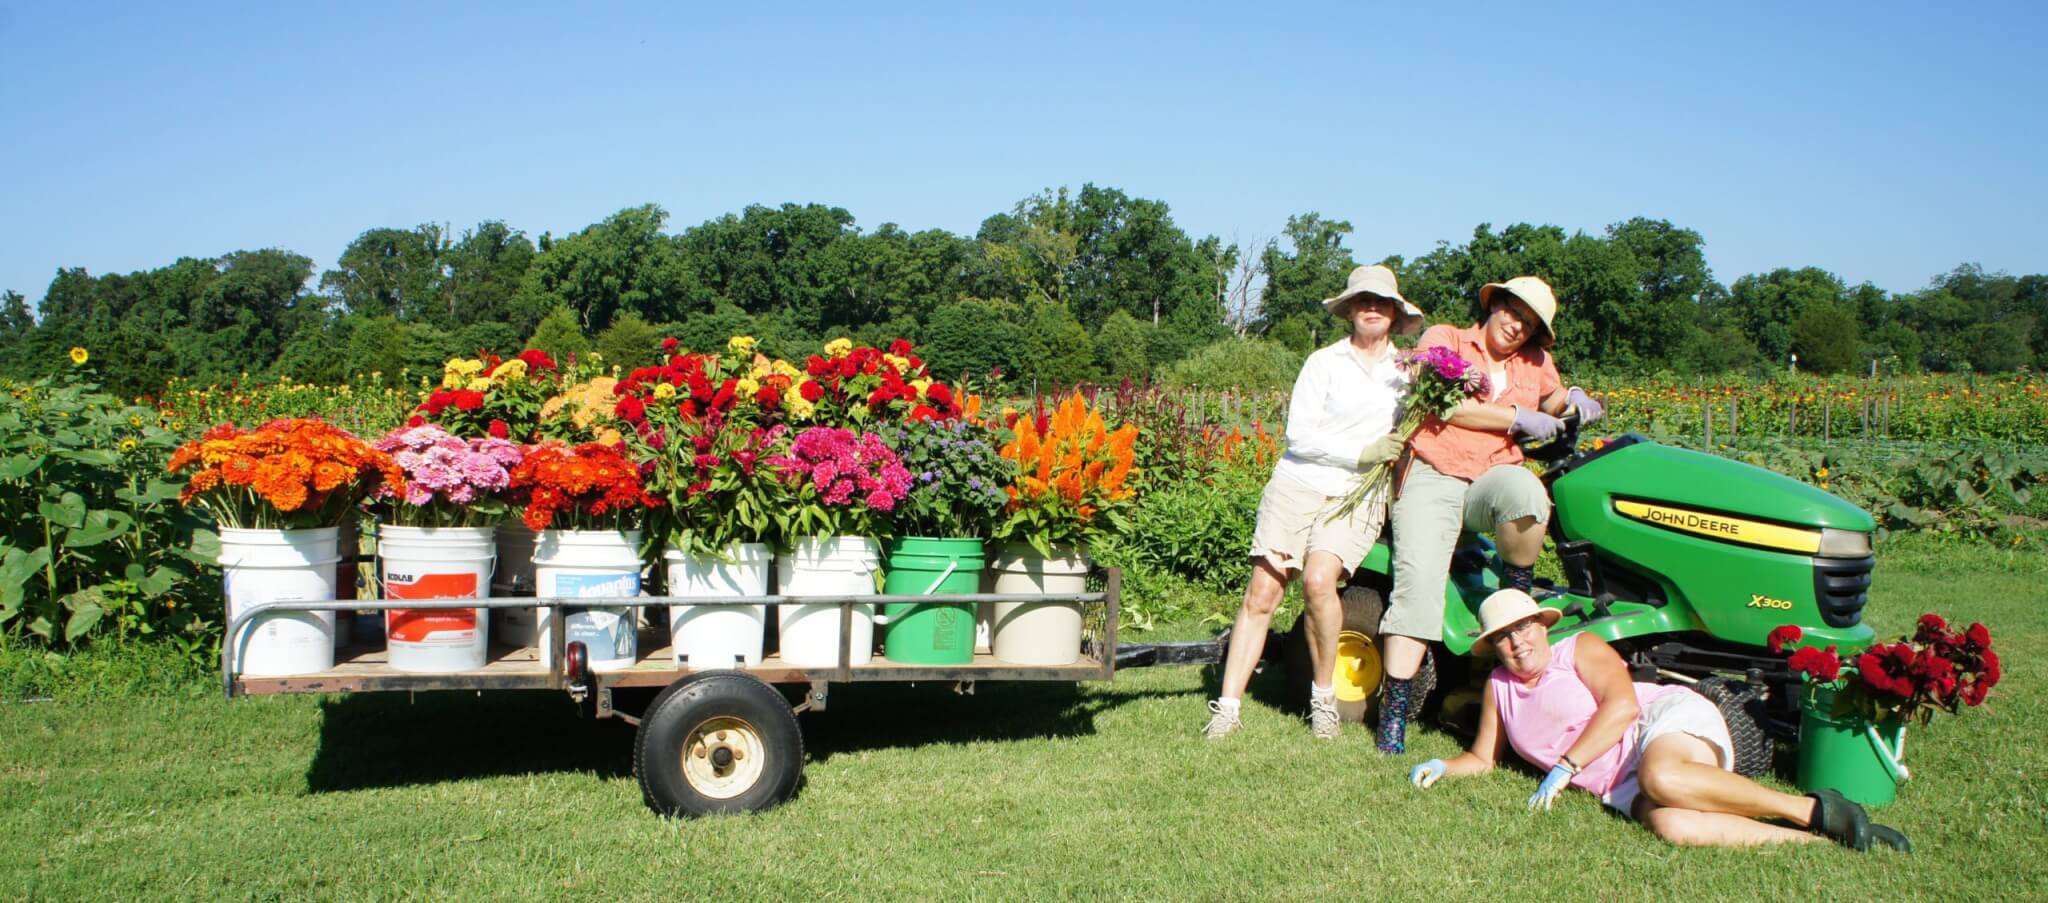 Flower Farming Business: Starting, Sustaining, and Surviving